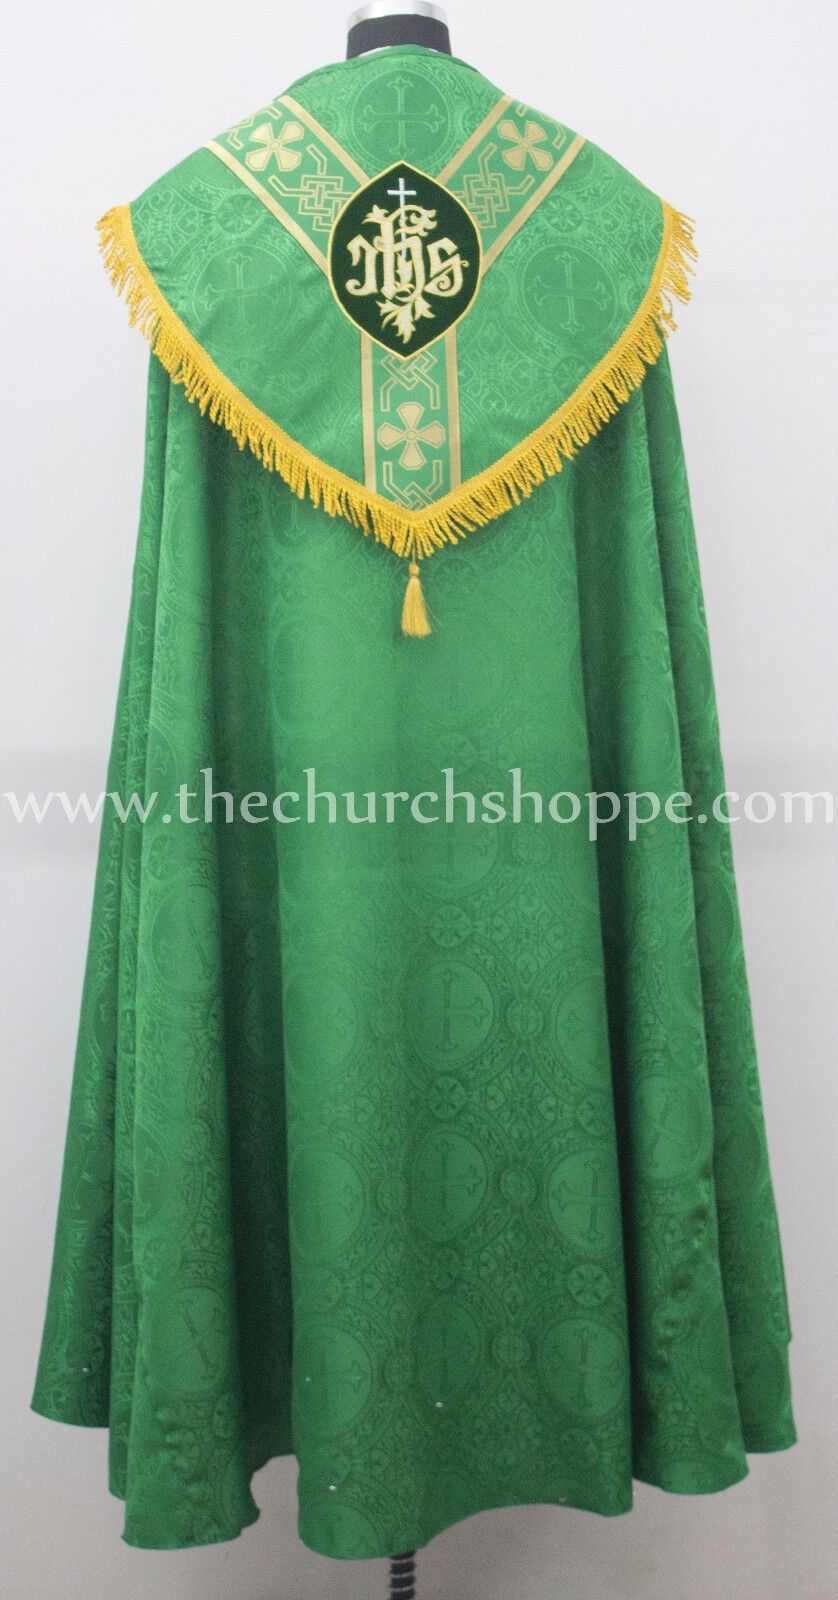 NEW Green Cope & Stole Set with IHS embroidery,capa pluvial,chape,far fronte